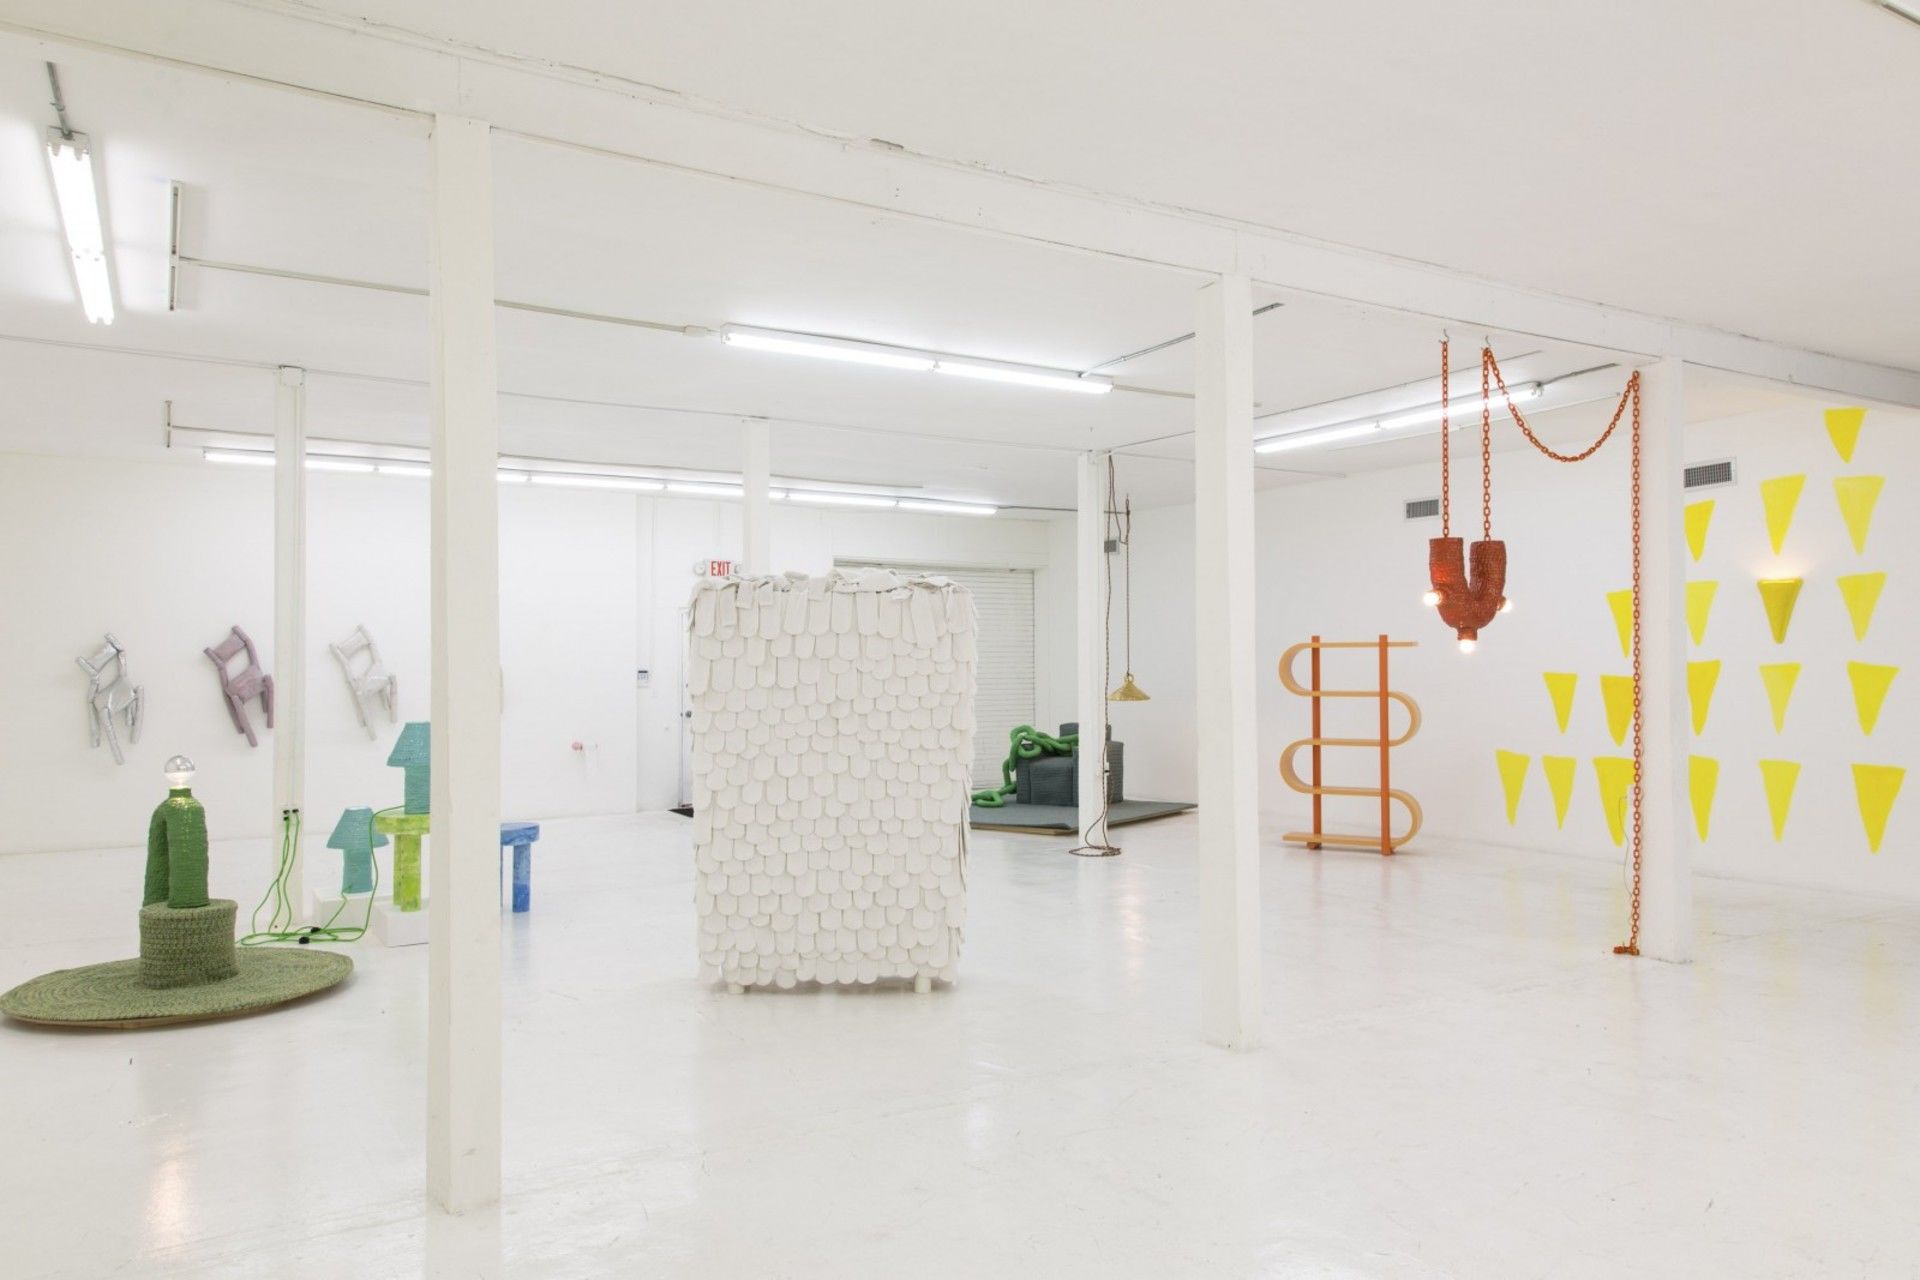 Installation view of Docile/Domicile/Dandy by Katie Stout at Gallery Diet, Miami 2015